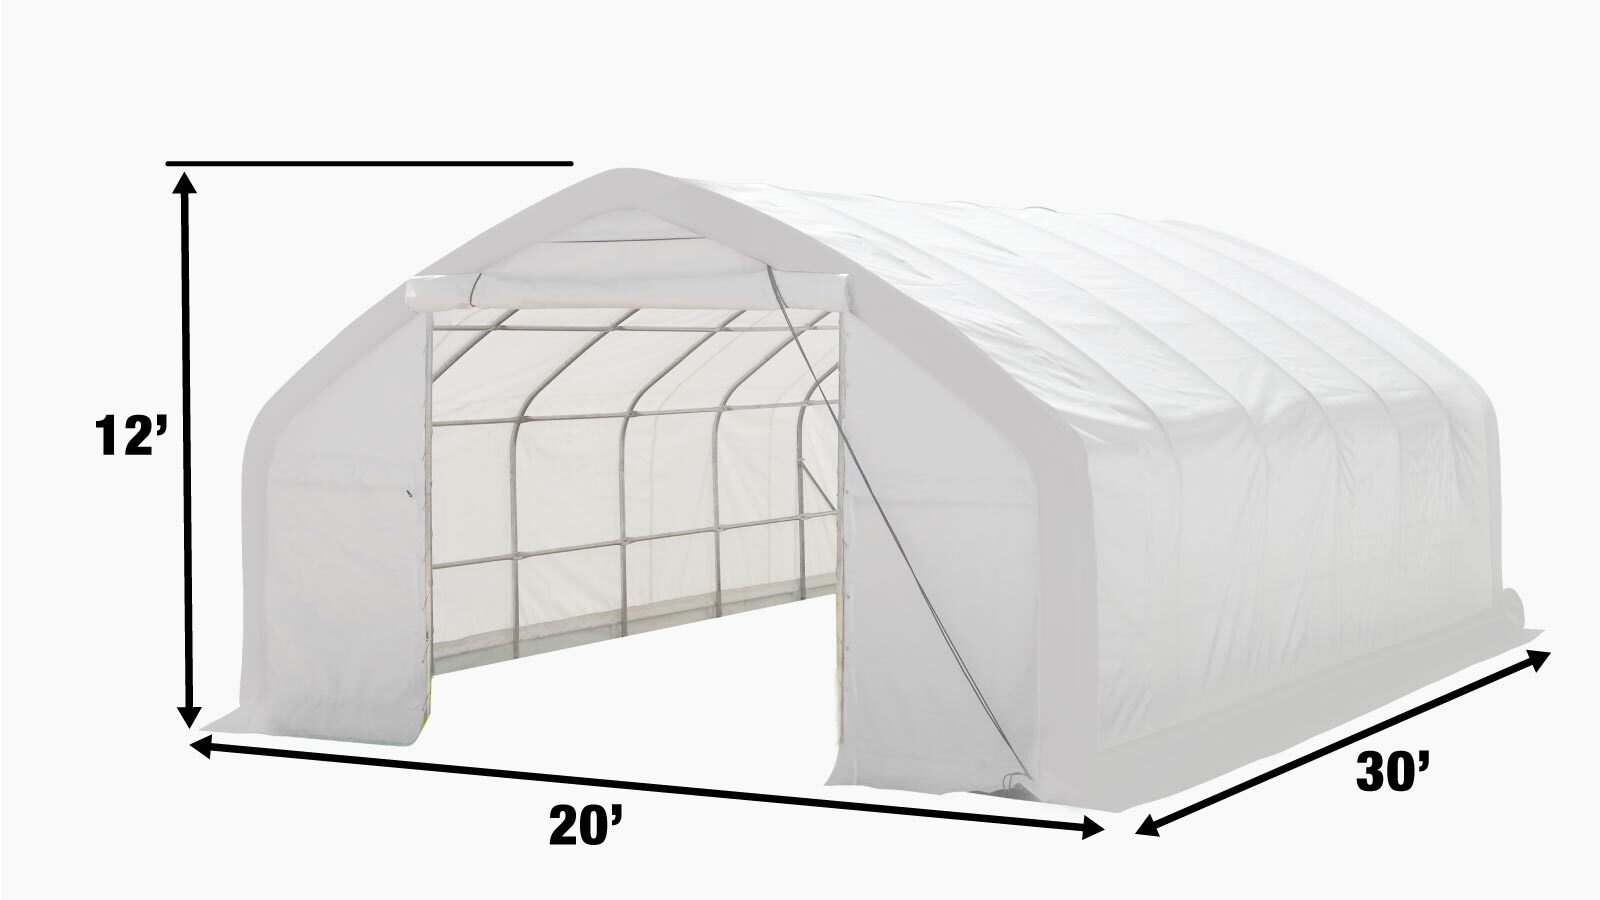 TMG Industrial 20' x 30' Straight Wall Peak Ceiling Storage Shelter with Heavy Duty 17 oz PVC Cover & Drive Through Door, TMG-ST2031V (Previously ST2030V)-specifications-image